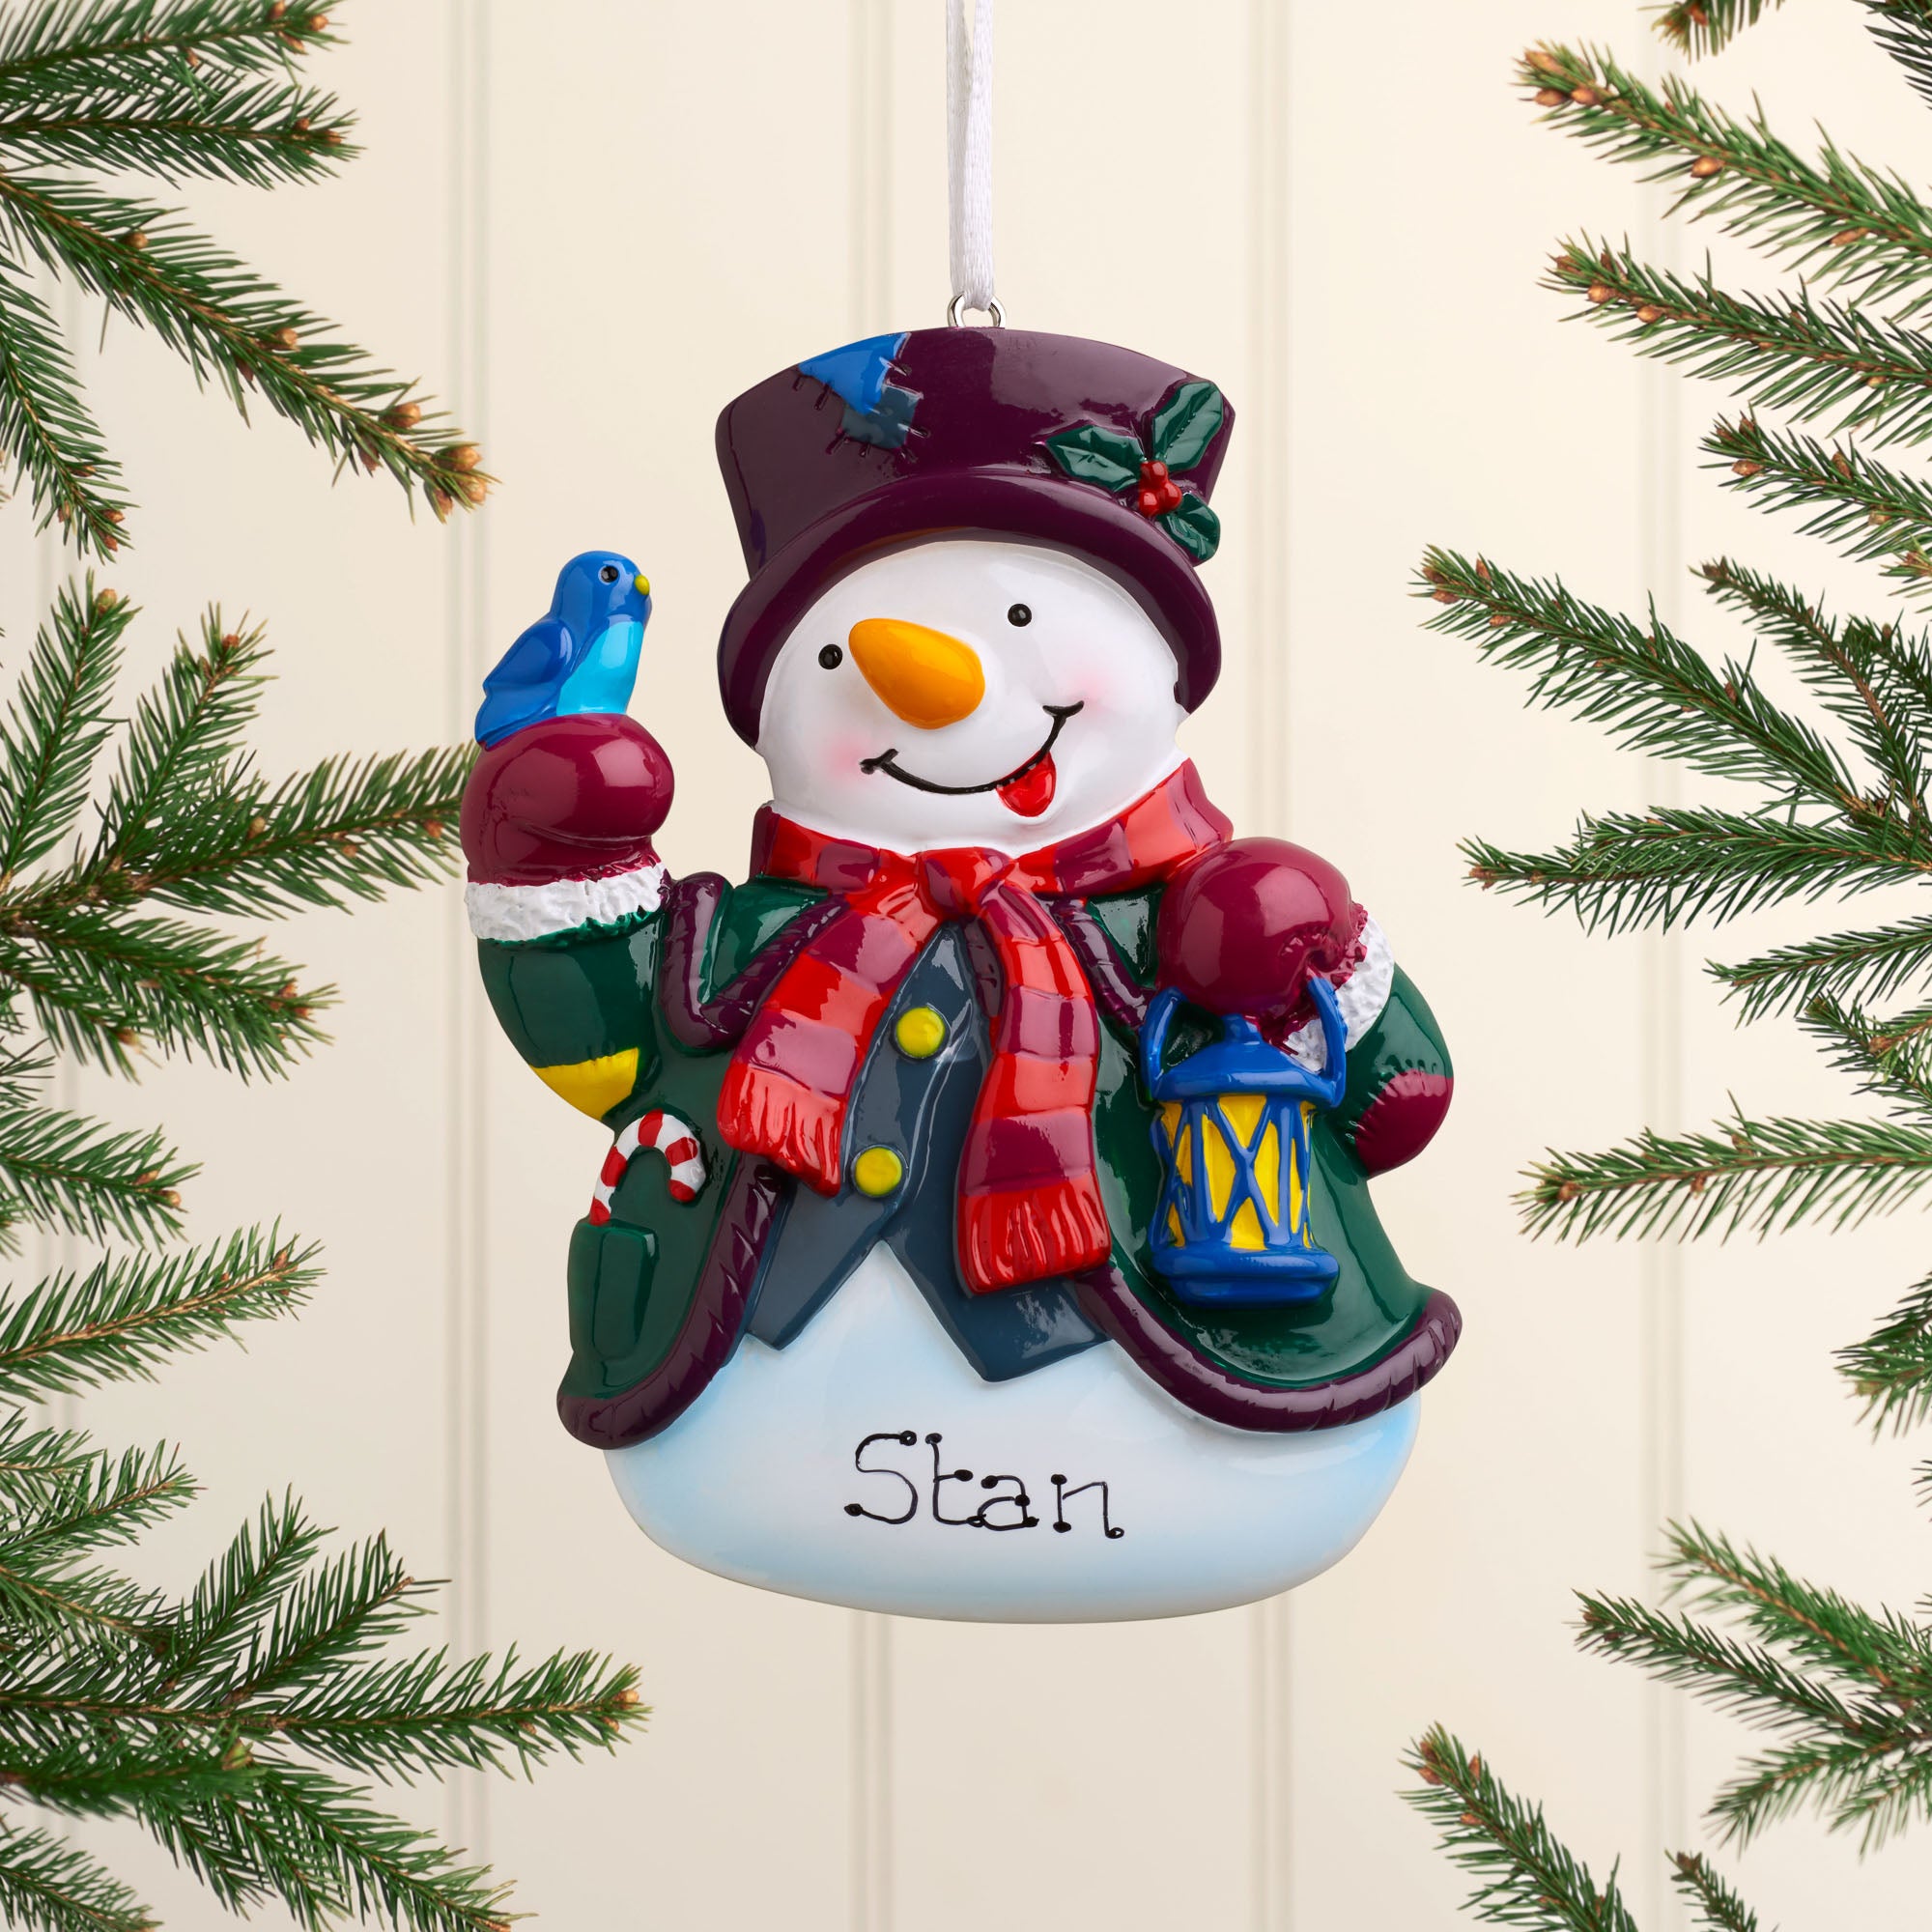 Personalised Family Christmas Xmas Tree Decoration Ornament - Snowman with Bird